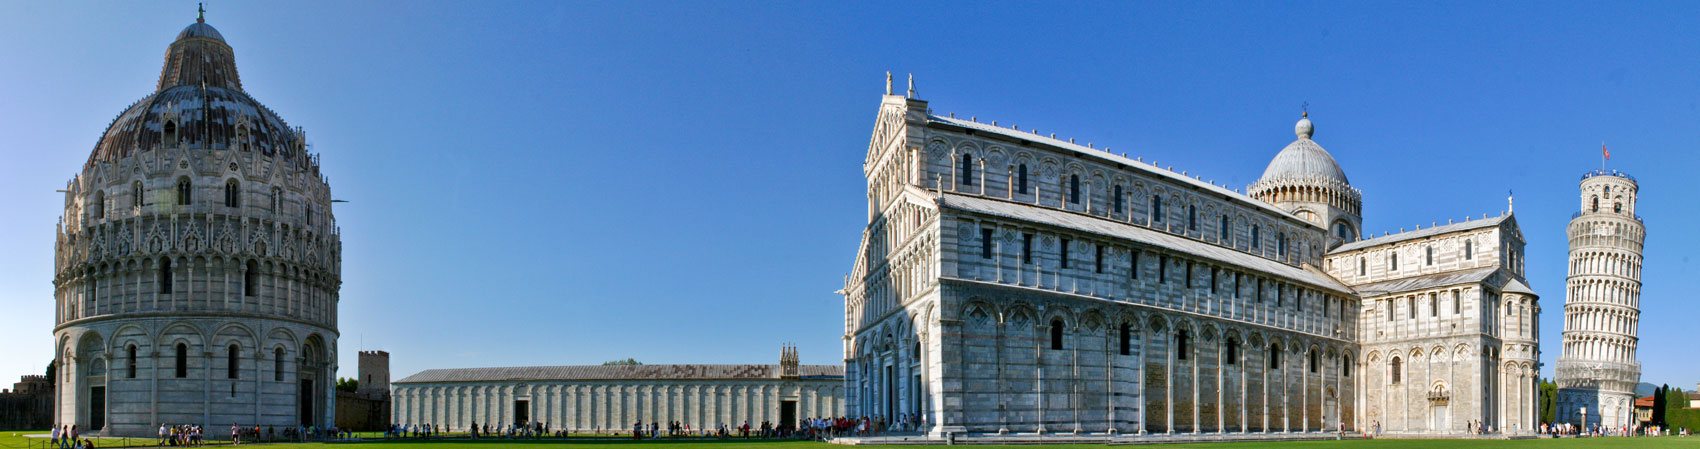 The Leaning Tower of Pisa and the Square of Miracles